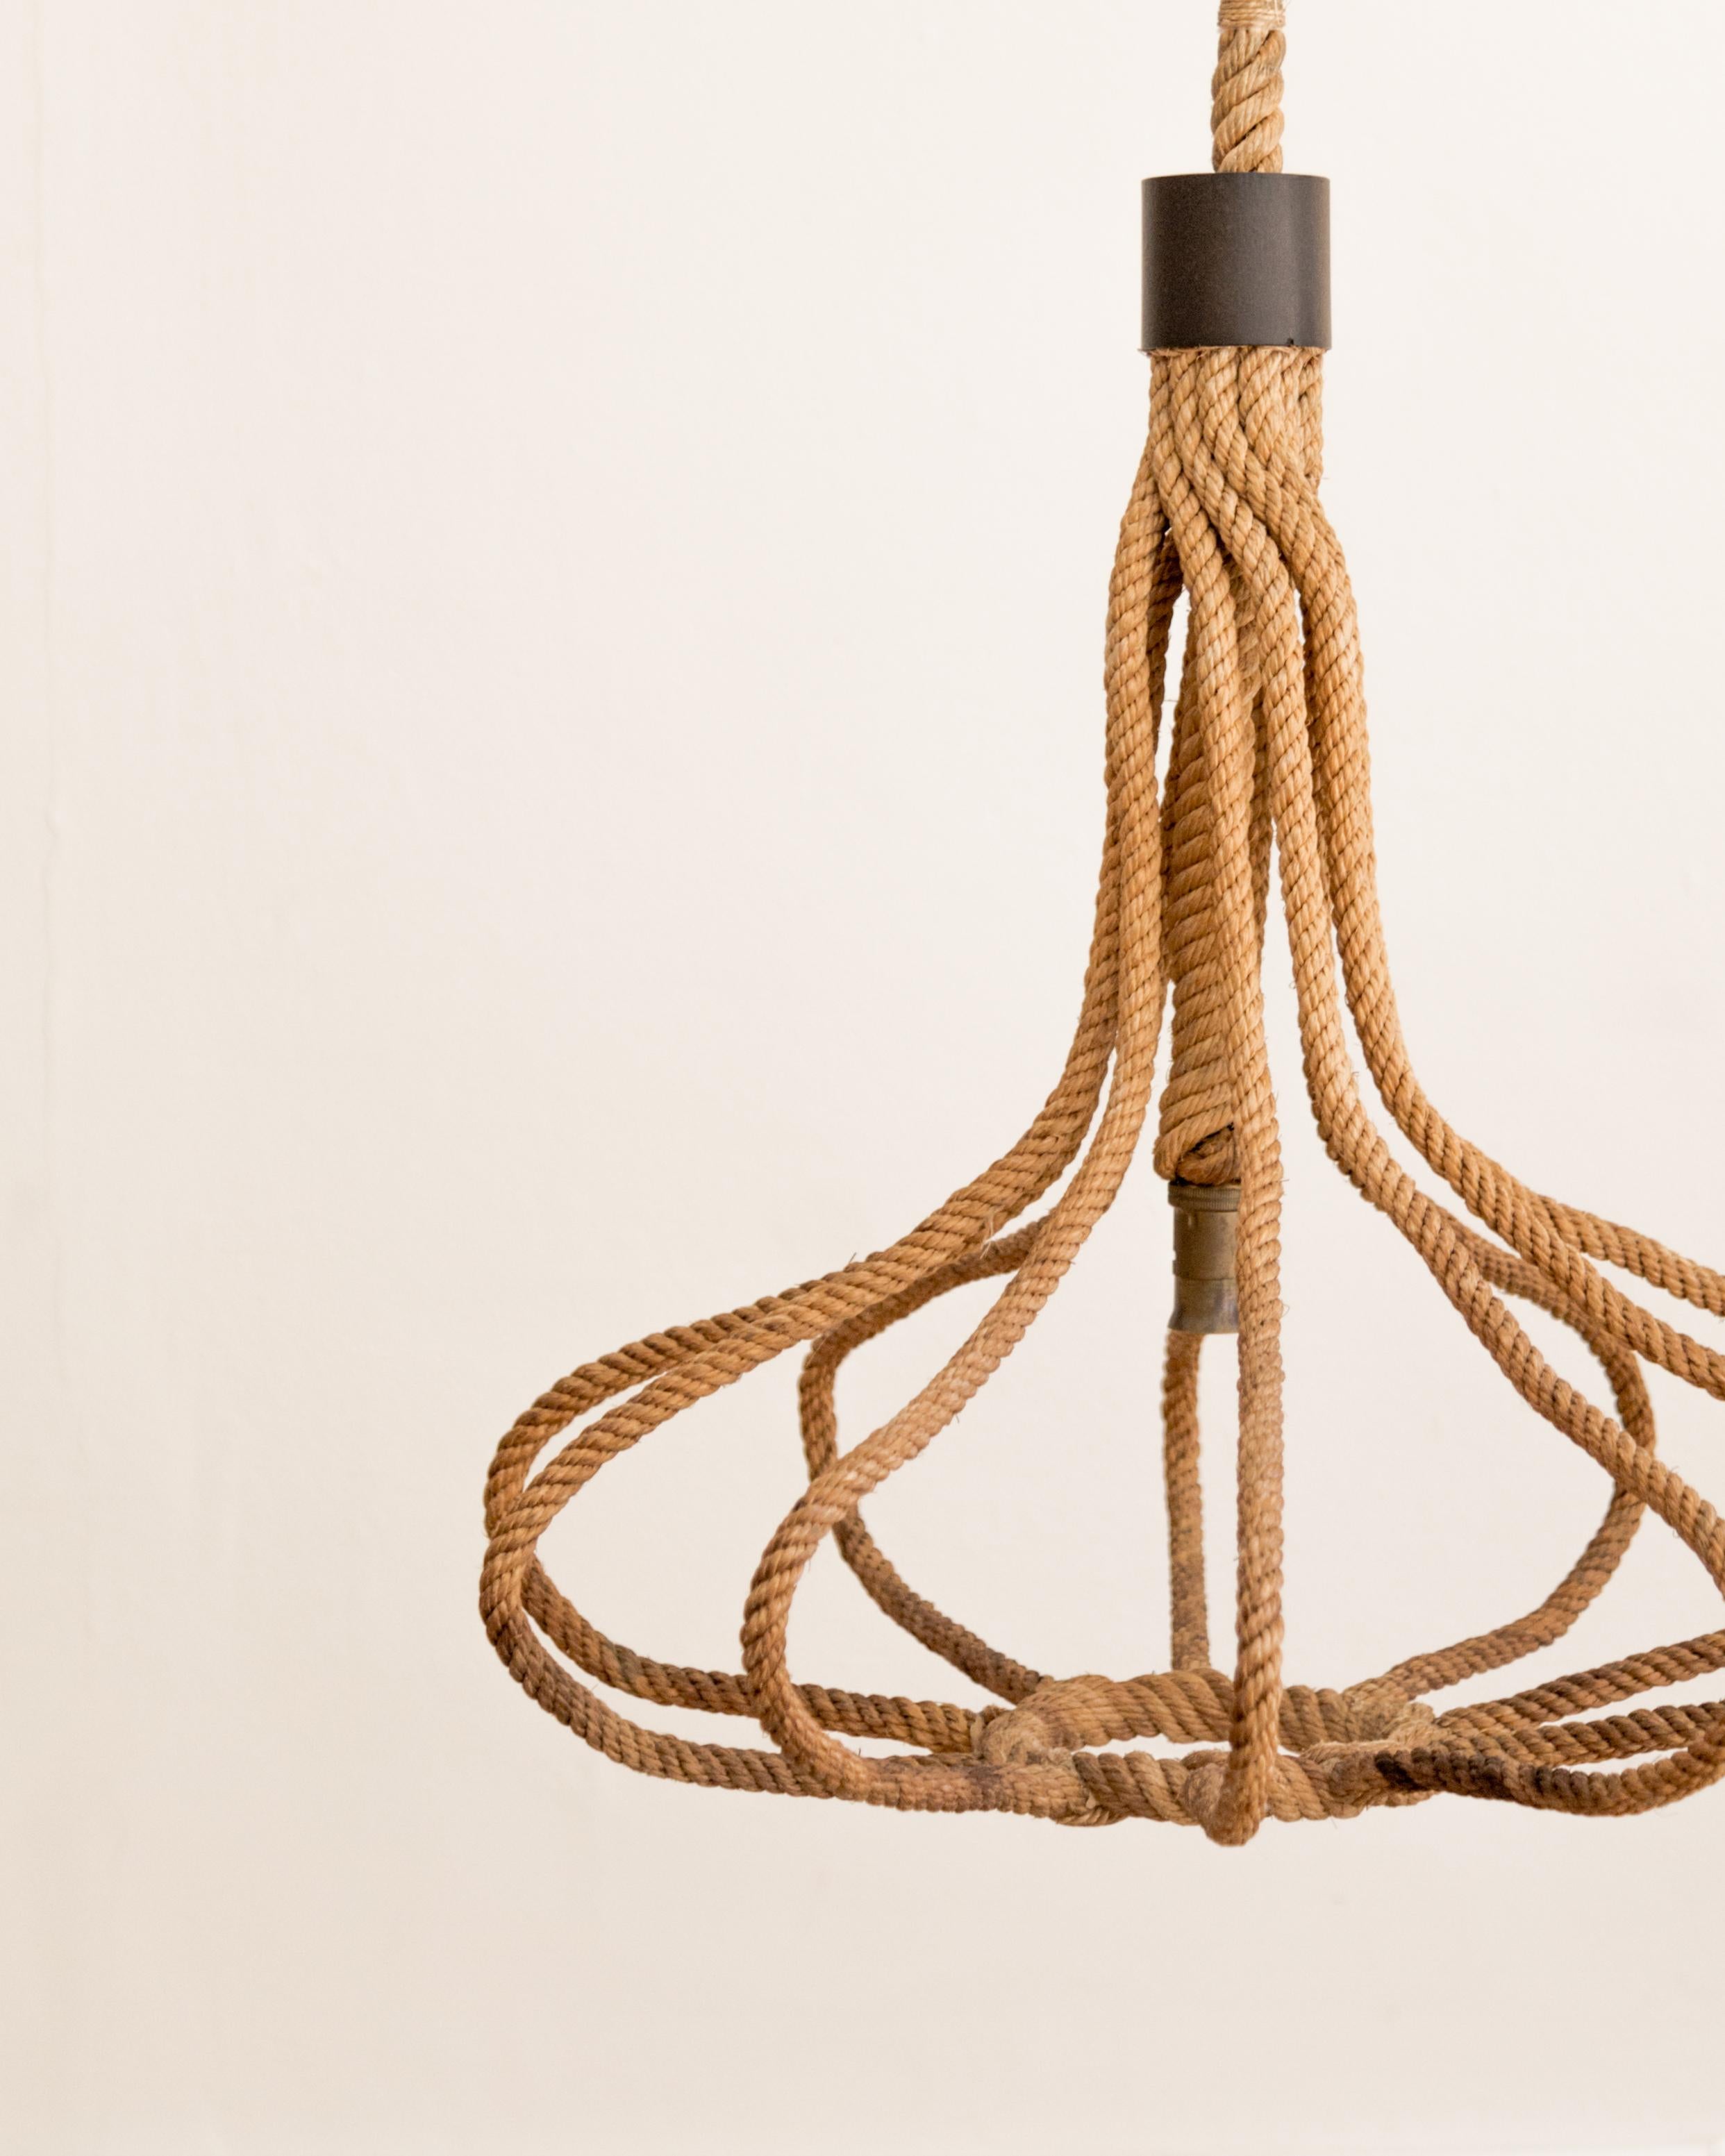 French sculptural rope pendant light by Audoux Minet.